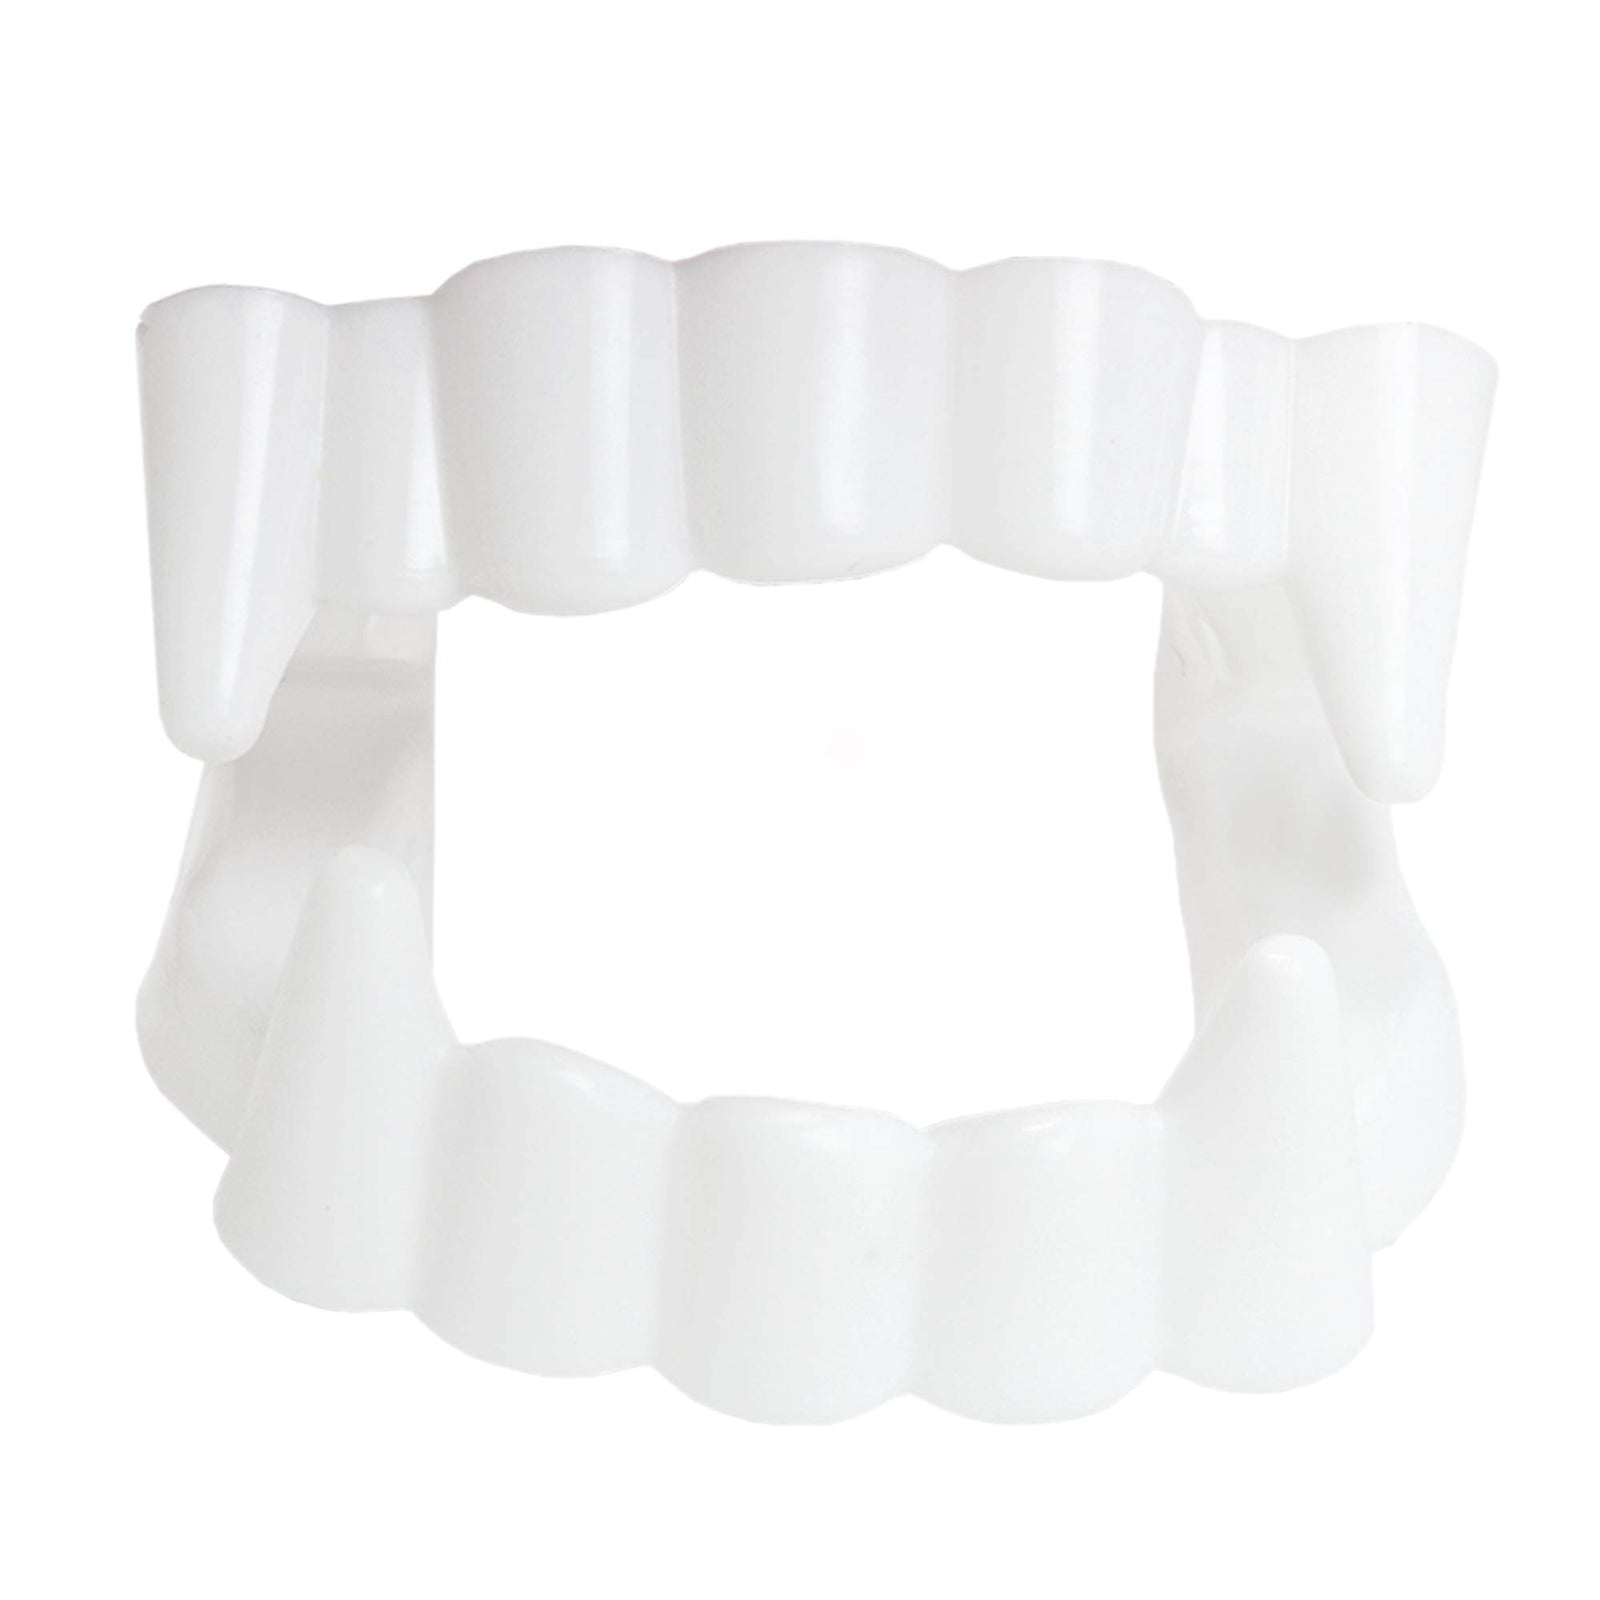 Skeleteen White Sharp Vampire Fangs - Dracula Monster Teeth for Party Favors and Supplies - 12 Pack